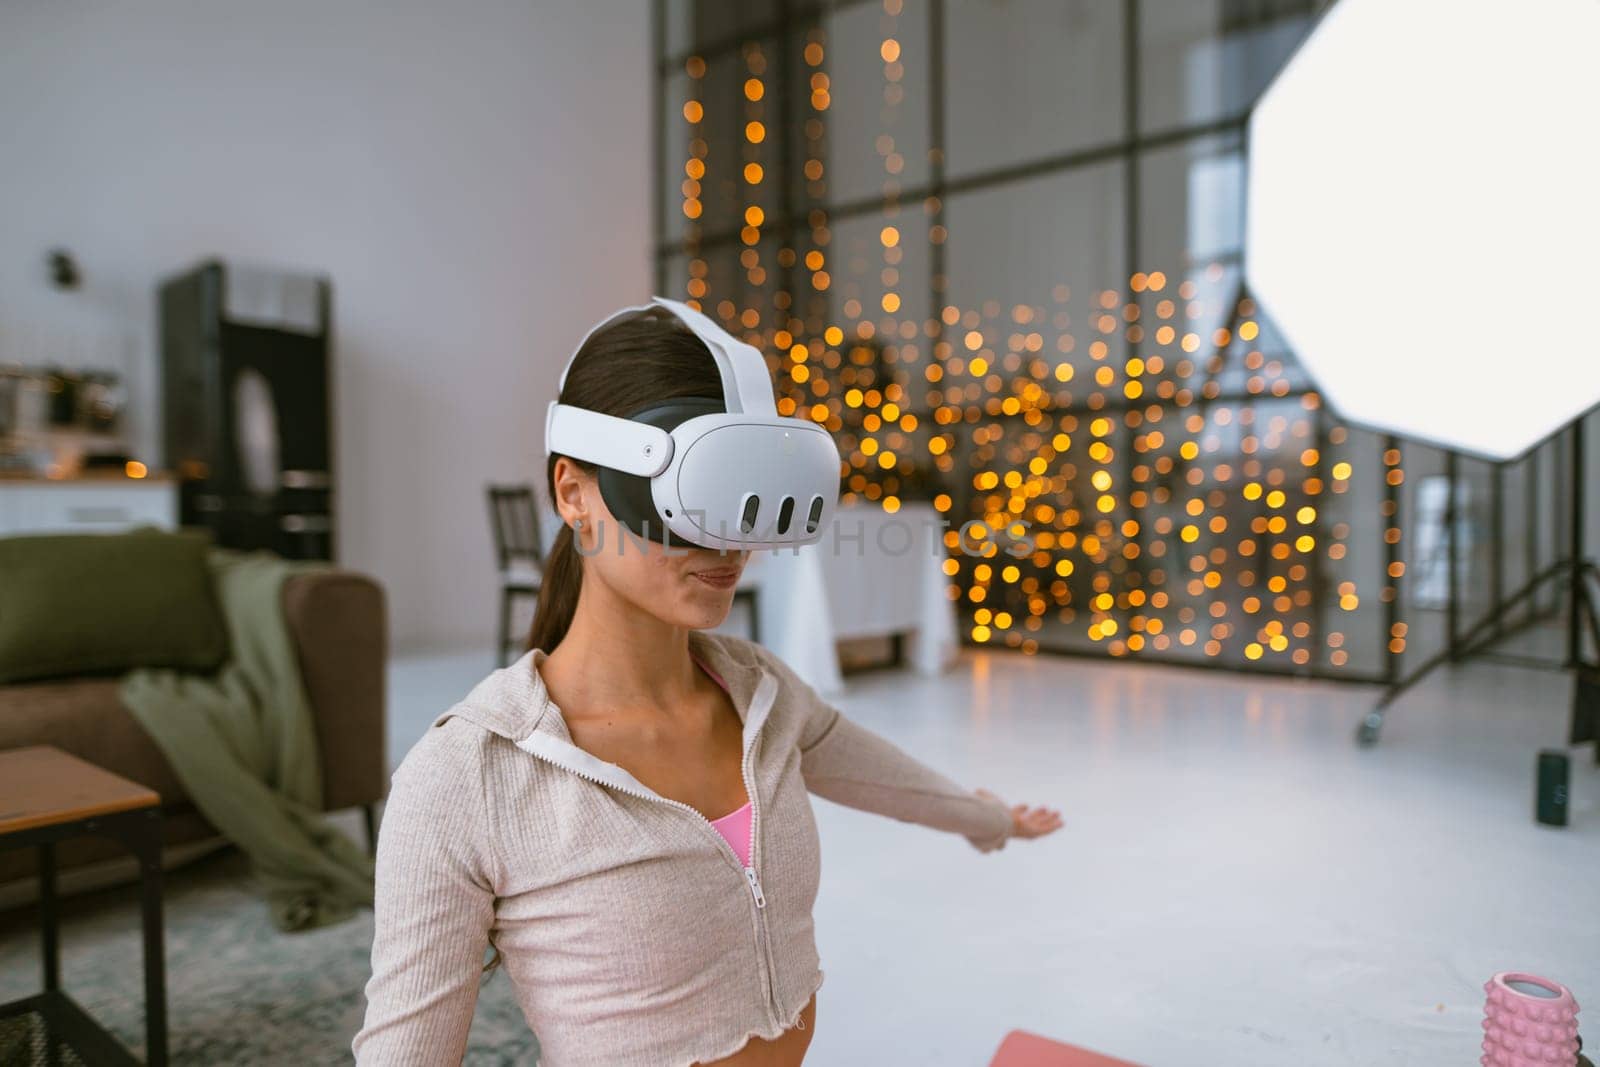 A personal trainer conducts virtual fitness sessions at home through a virtual reality headset during the Christmas festivities. High quality photo